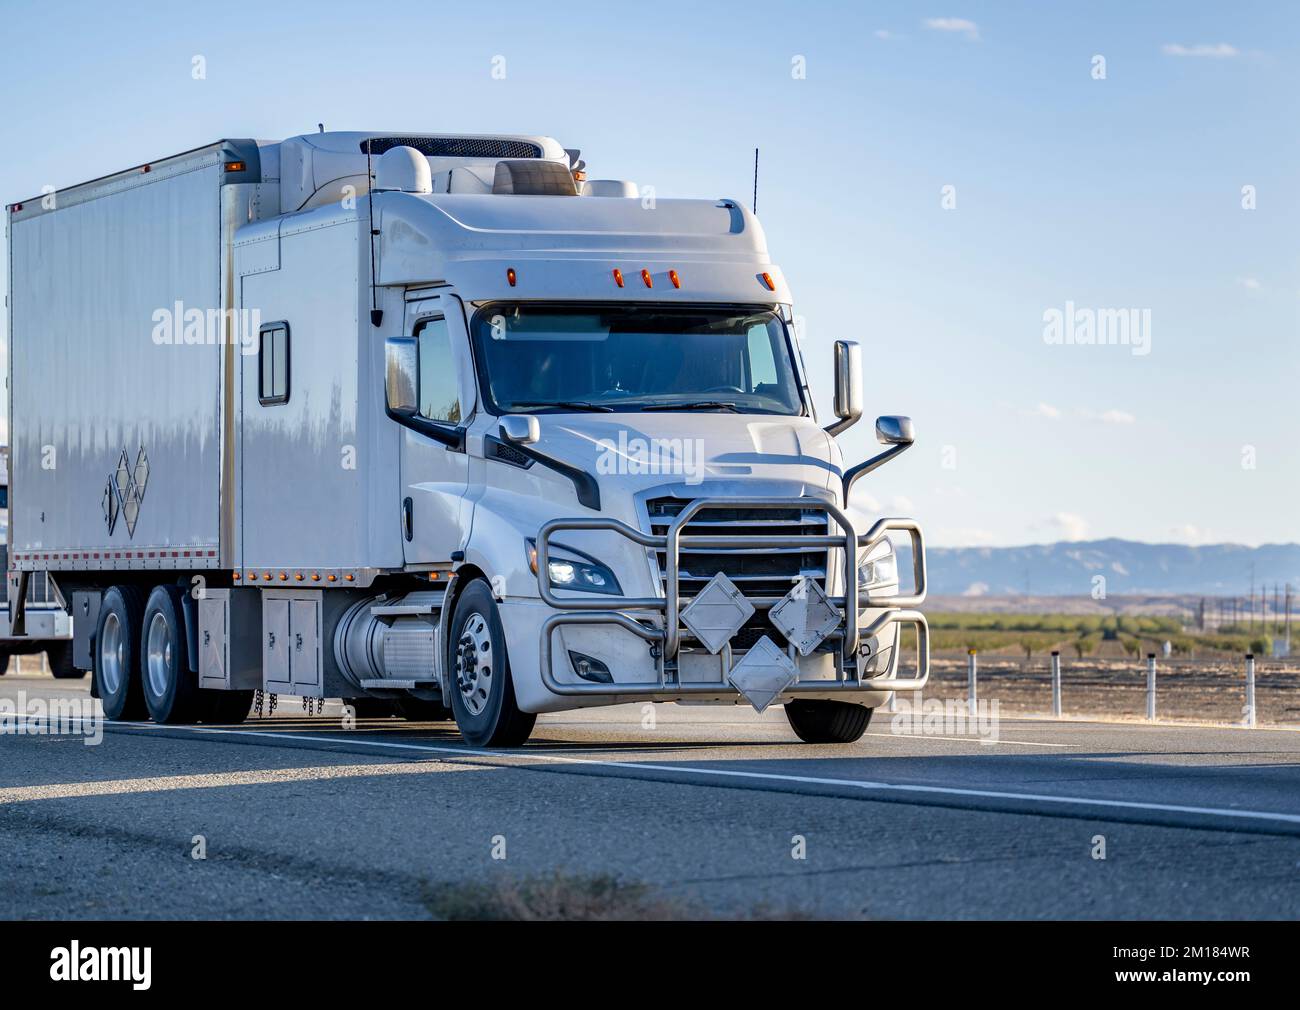 Industrial comfortable big rig white semi truck tractor with extended cab transporting frozen commercial cargo in refrigerator semi trailer running on Stock Photo